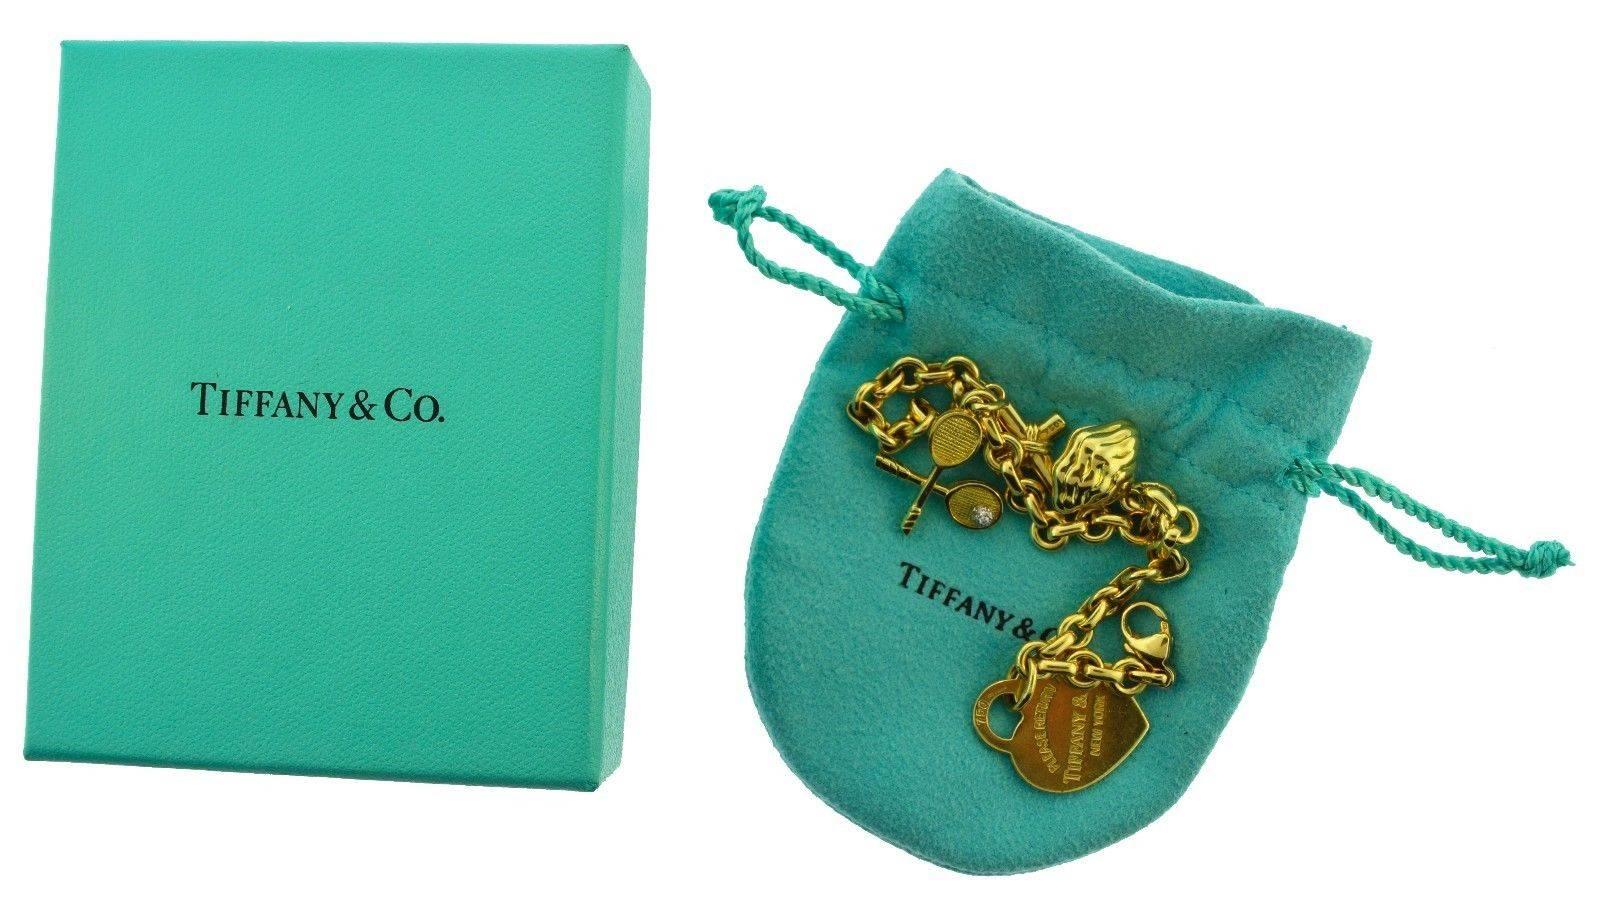 Designer: Tiffany & Co.
Metal: 18k Yellow Gold
Stones: Diamond on Racquet Charm,
Cultured Pearl in Oyster 
(enamel finish)
Total Item Weight (grams): 37.4 grams
Total Length: 7 inches
Includes: Box

With this popular Tiffany motif, one is